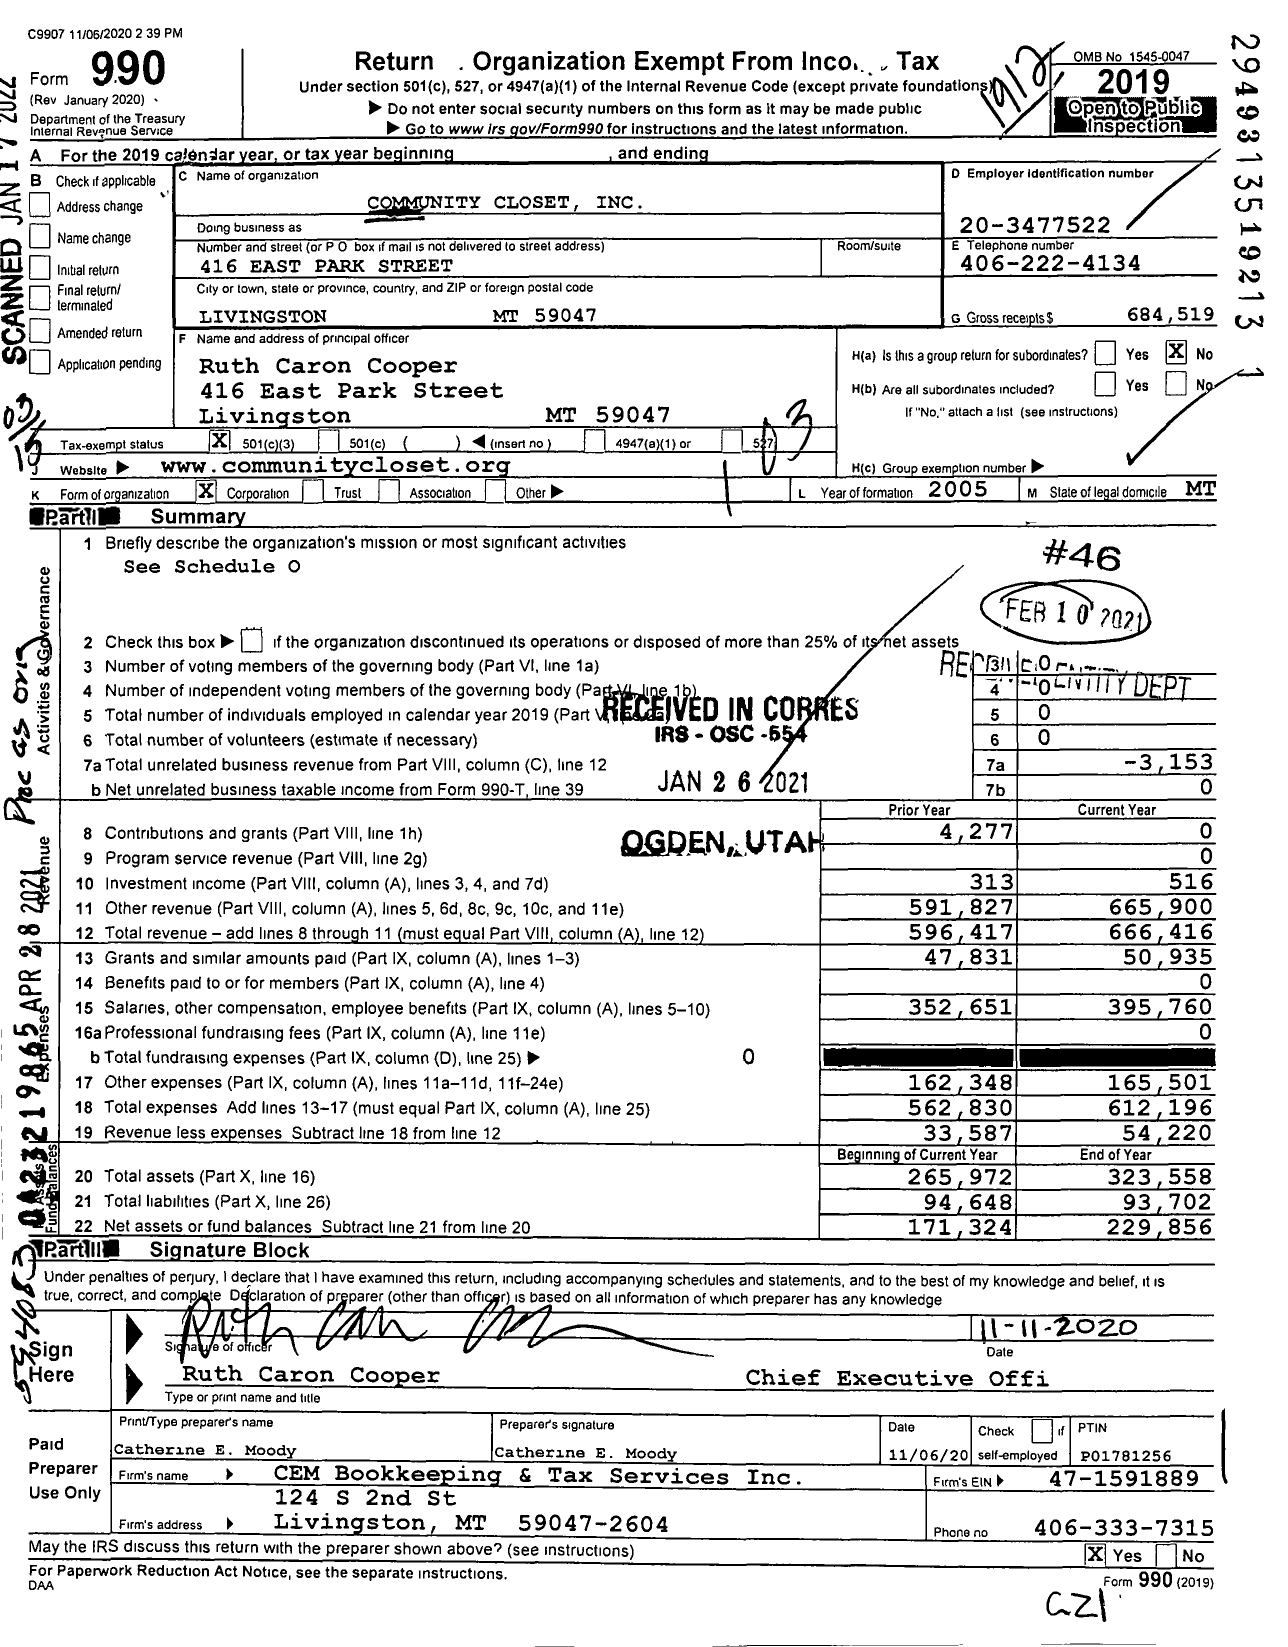 Image of first page of 2019 Form 990 for Community Closet